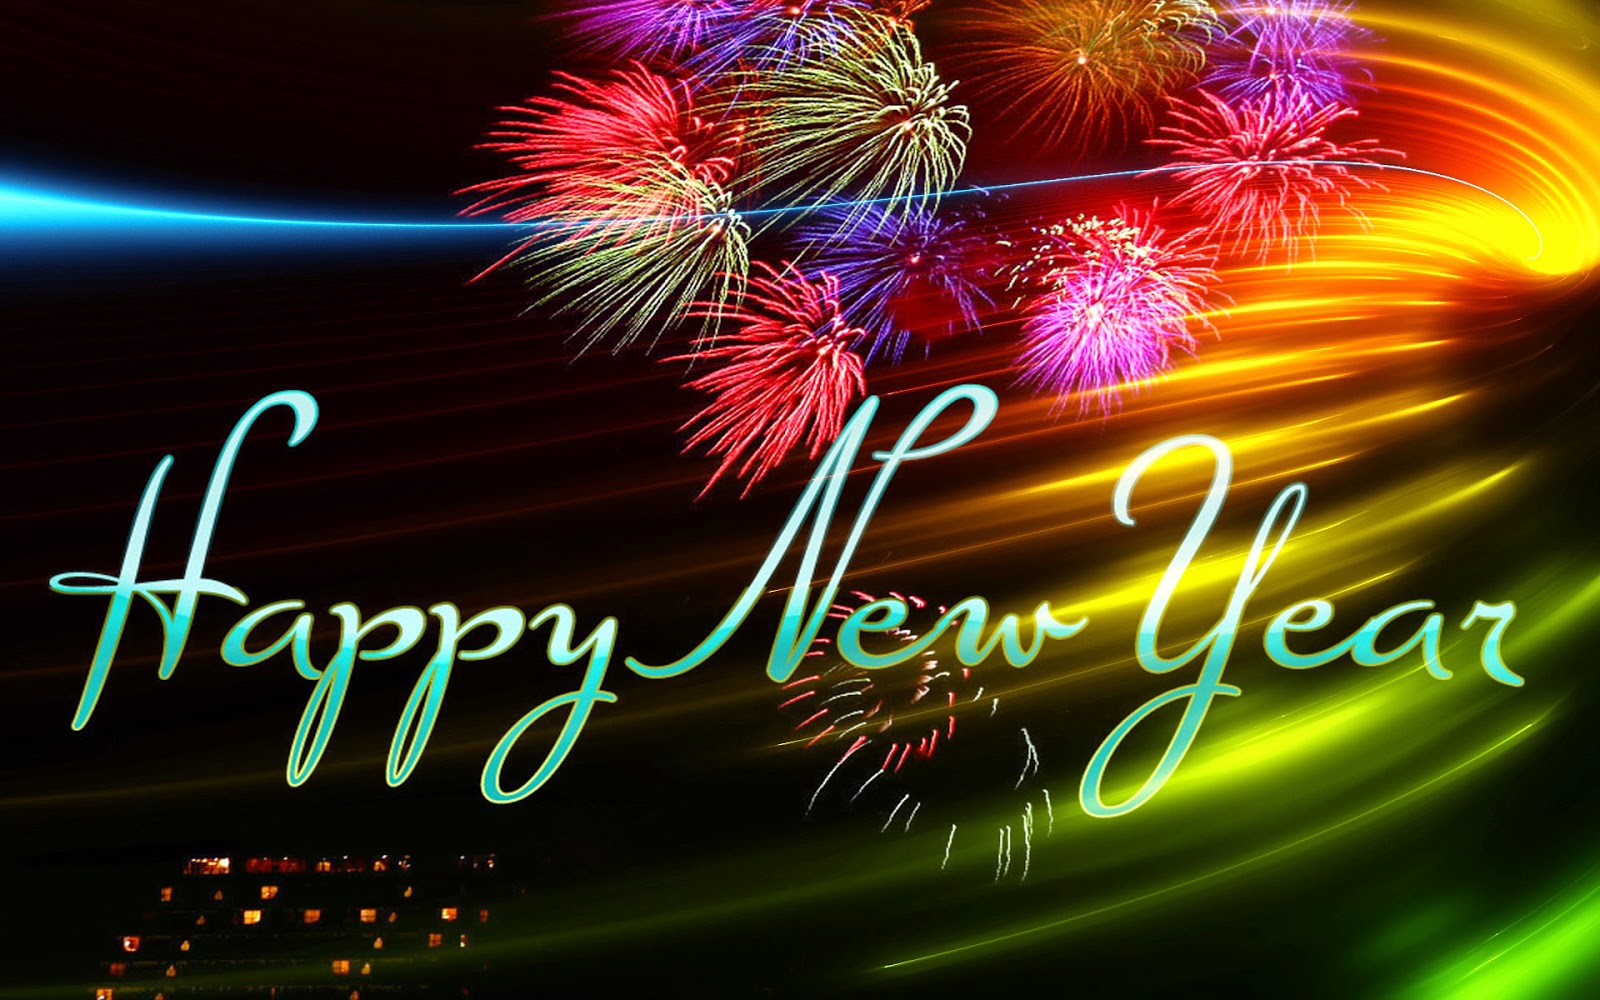 Happy New Year 2016 Download Images   Welcome Happy New Year 2016